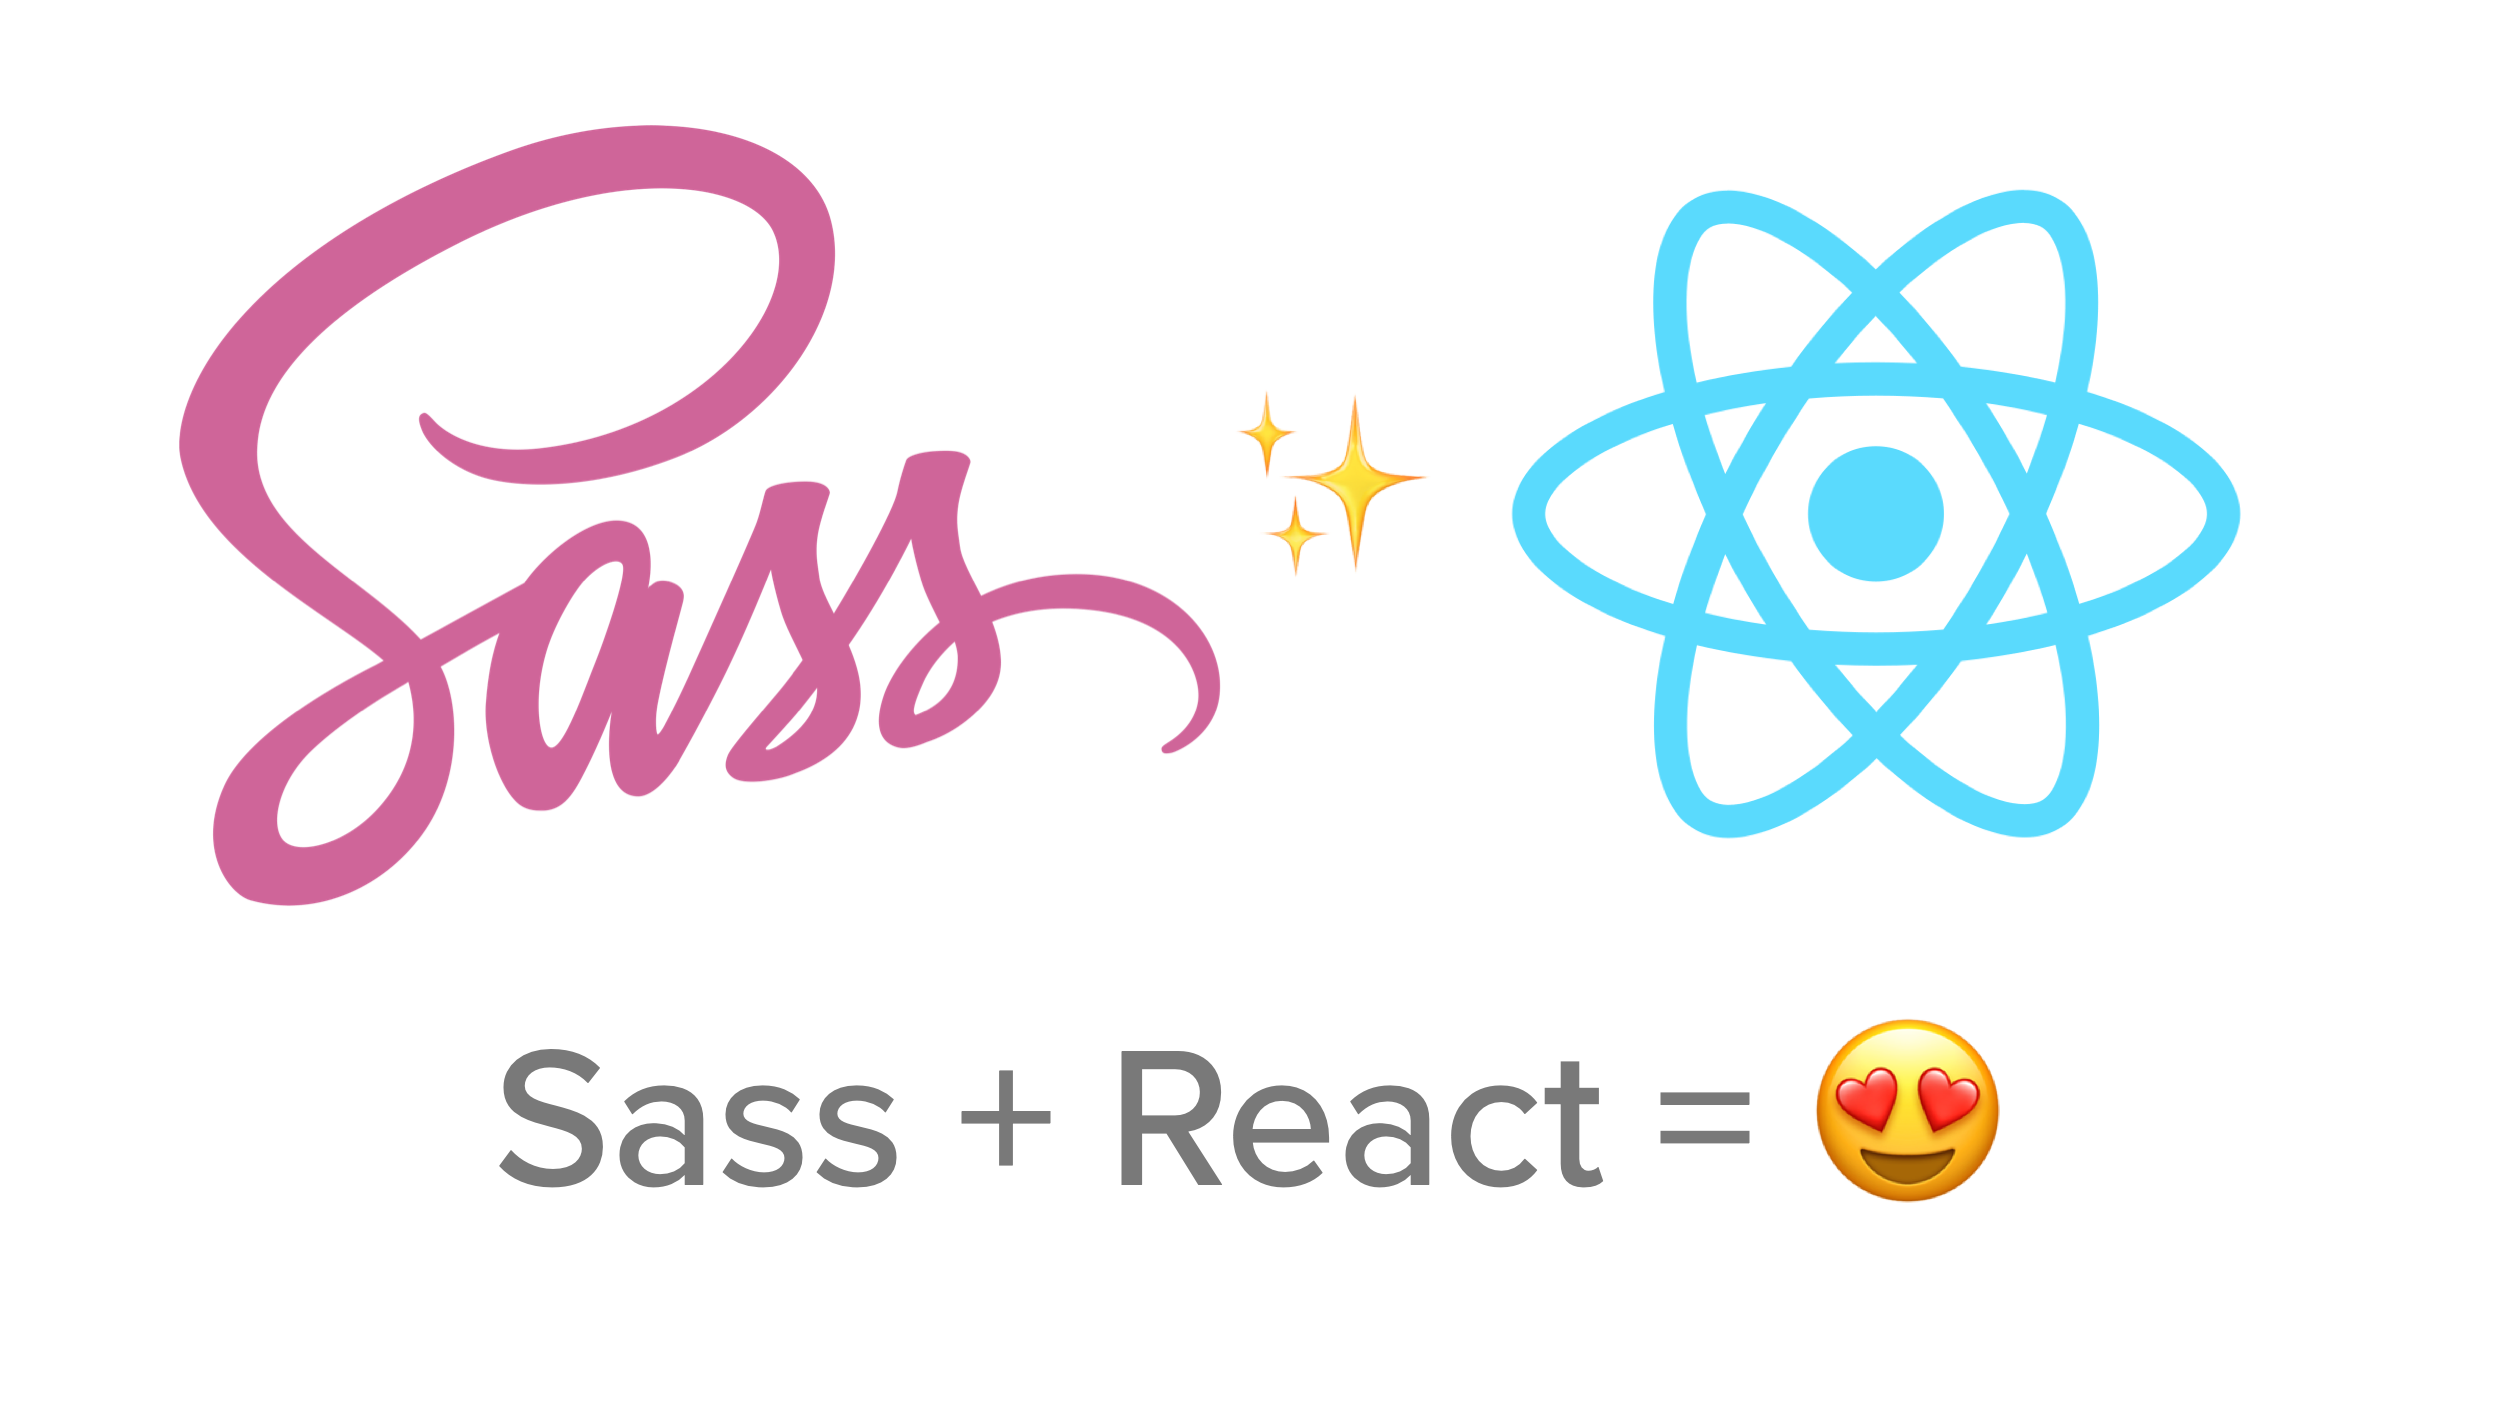 Use Sass with React to Build Beautiful Apps